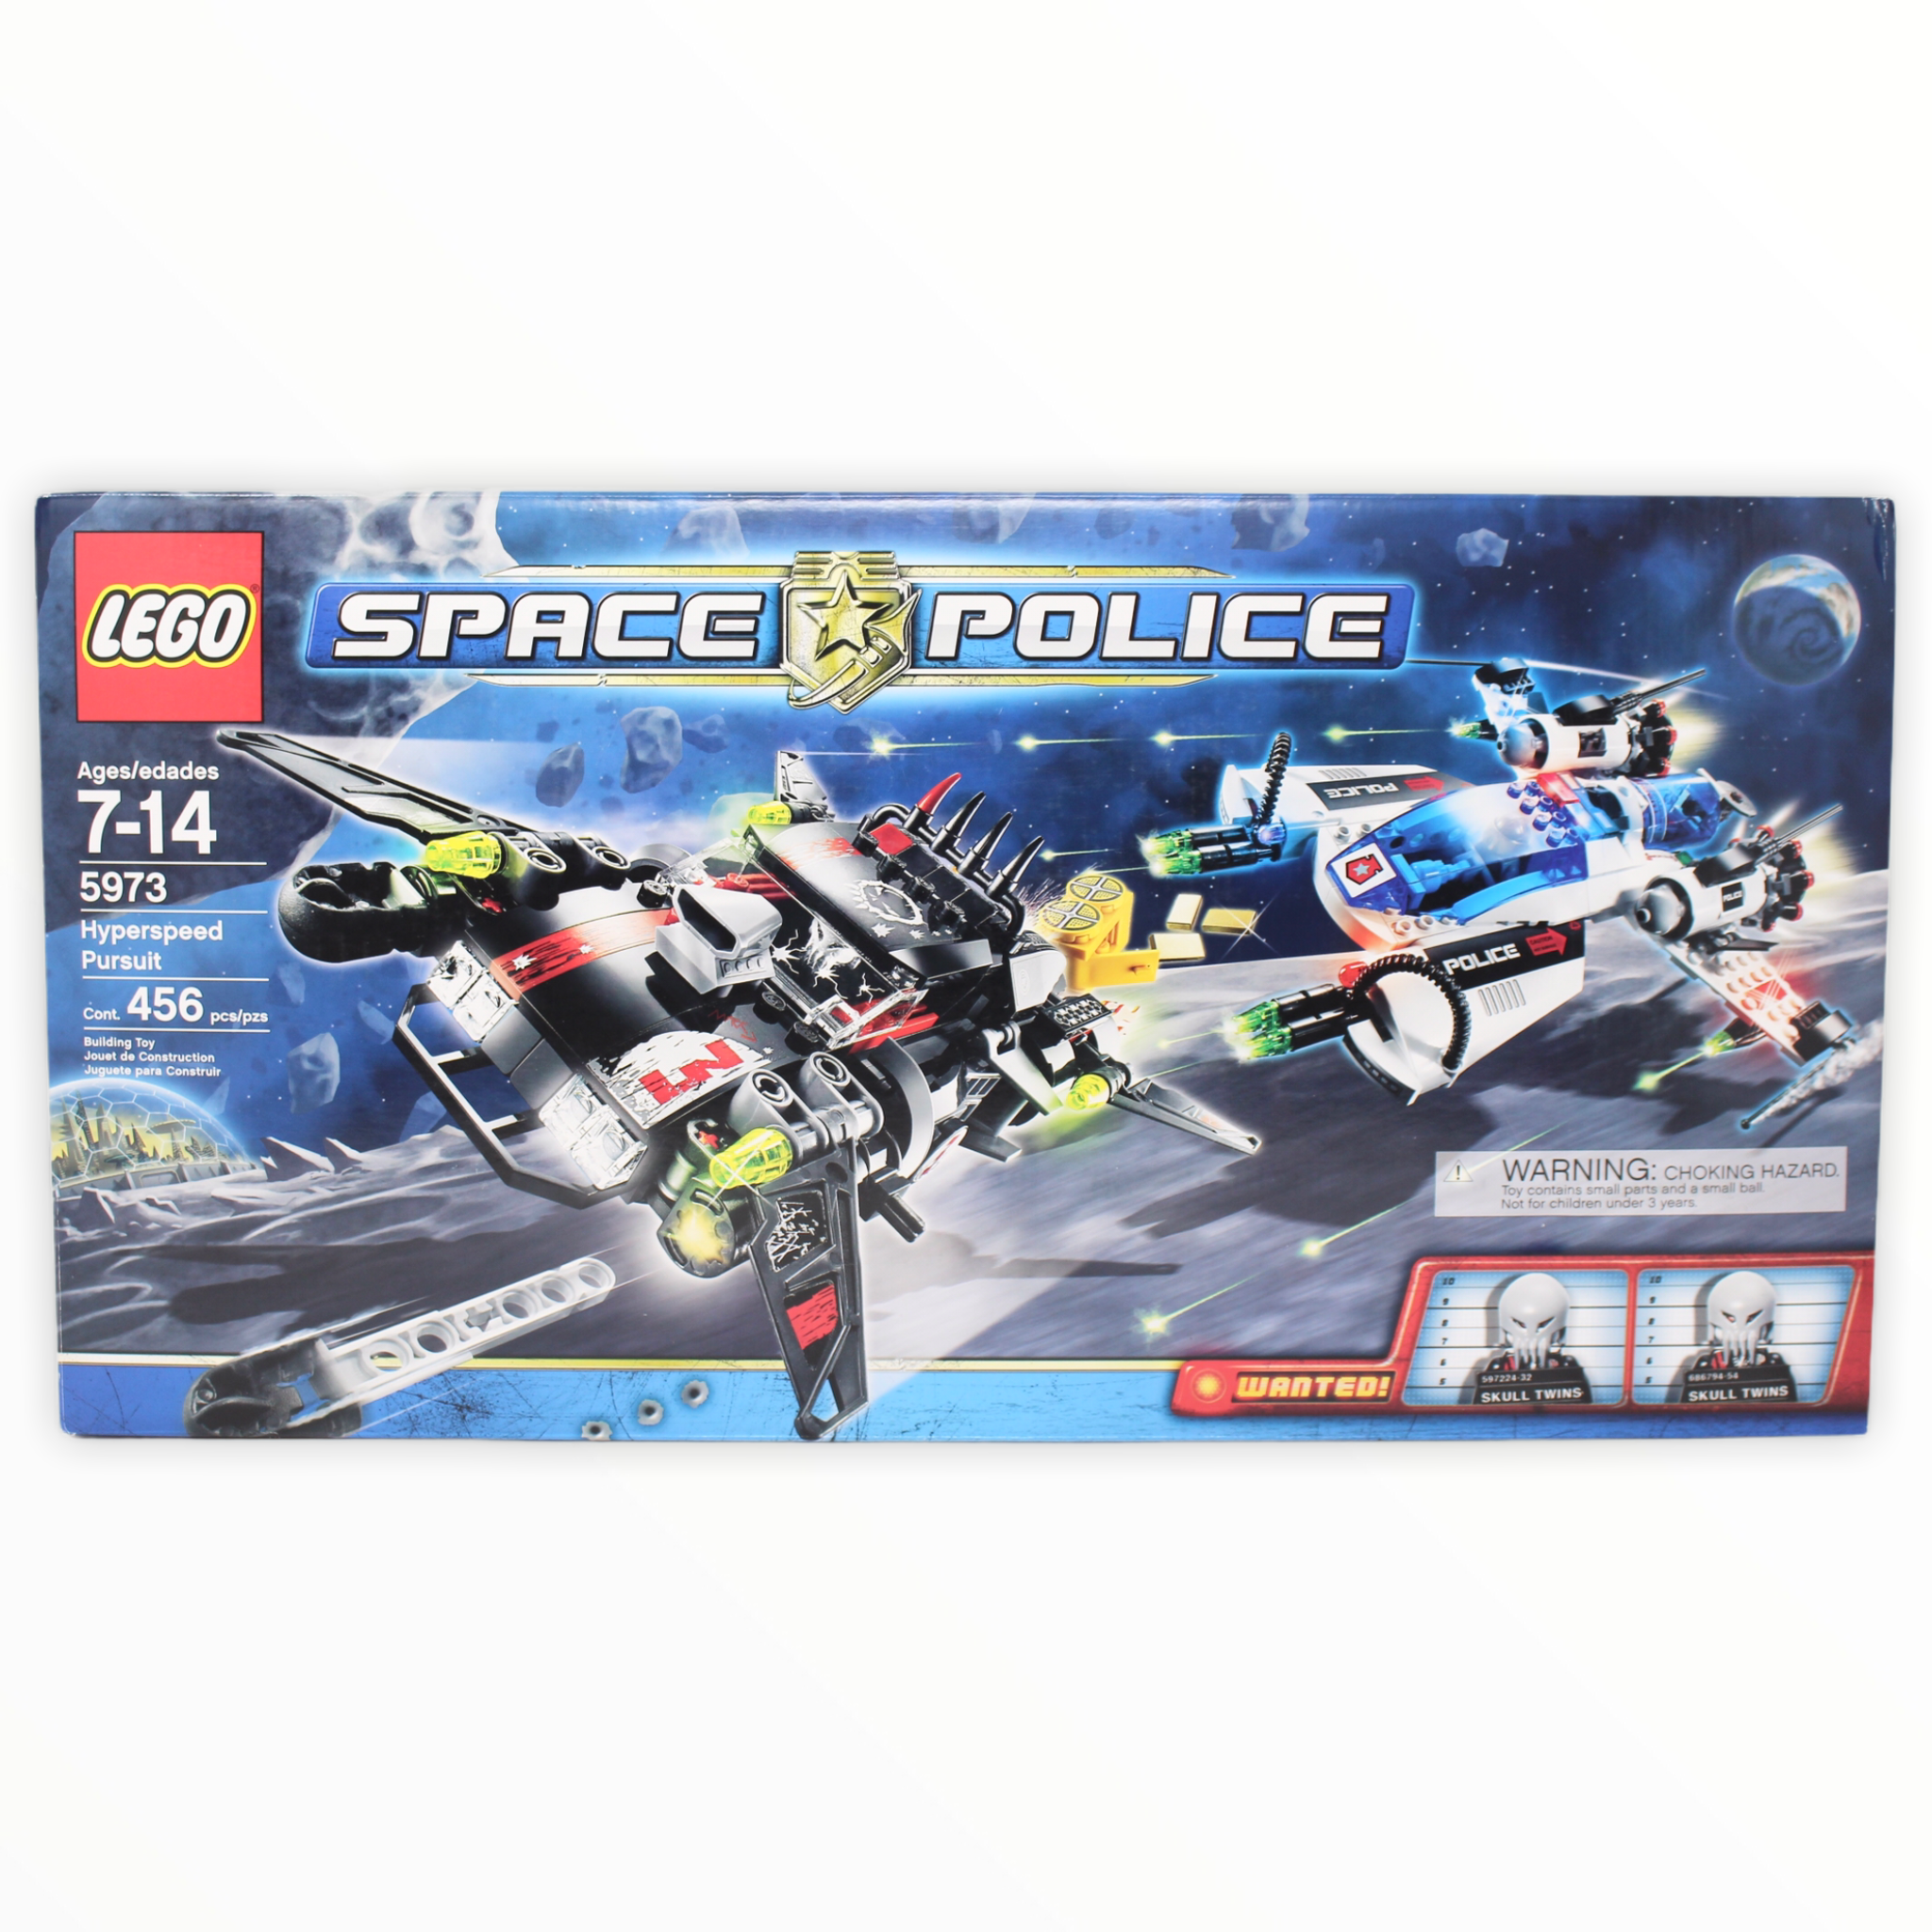 Retired Set 5973 Space Police Hyperspeed Pursuit